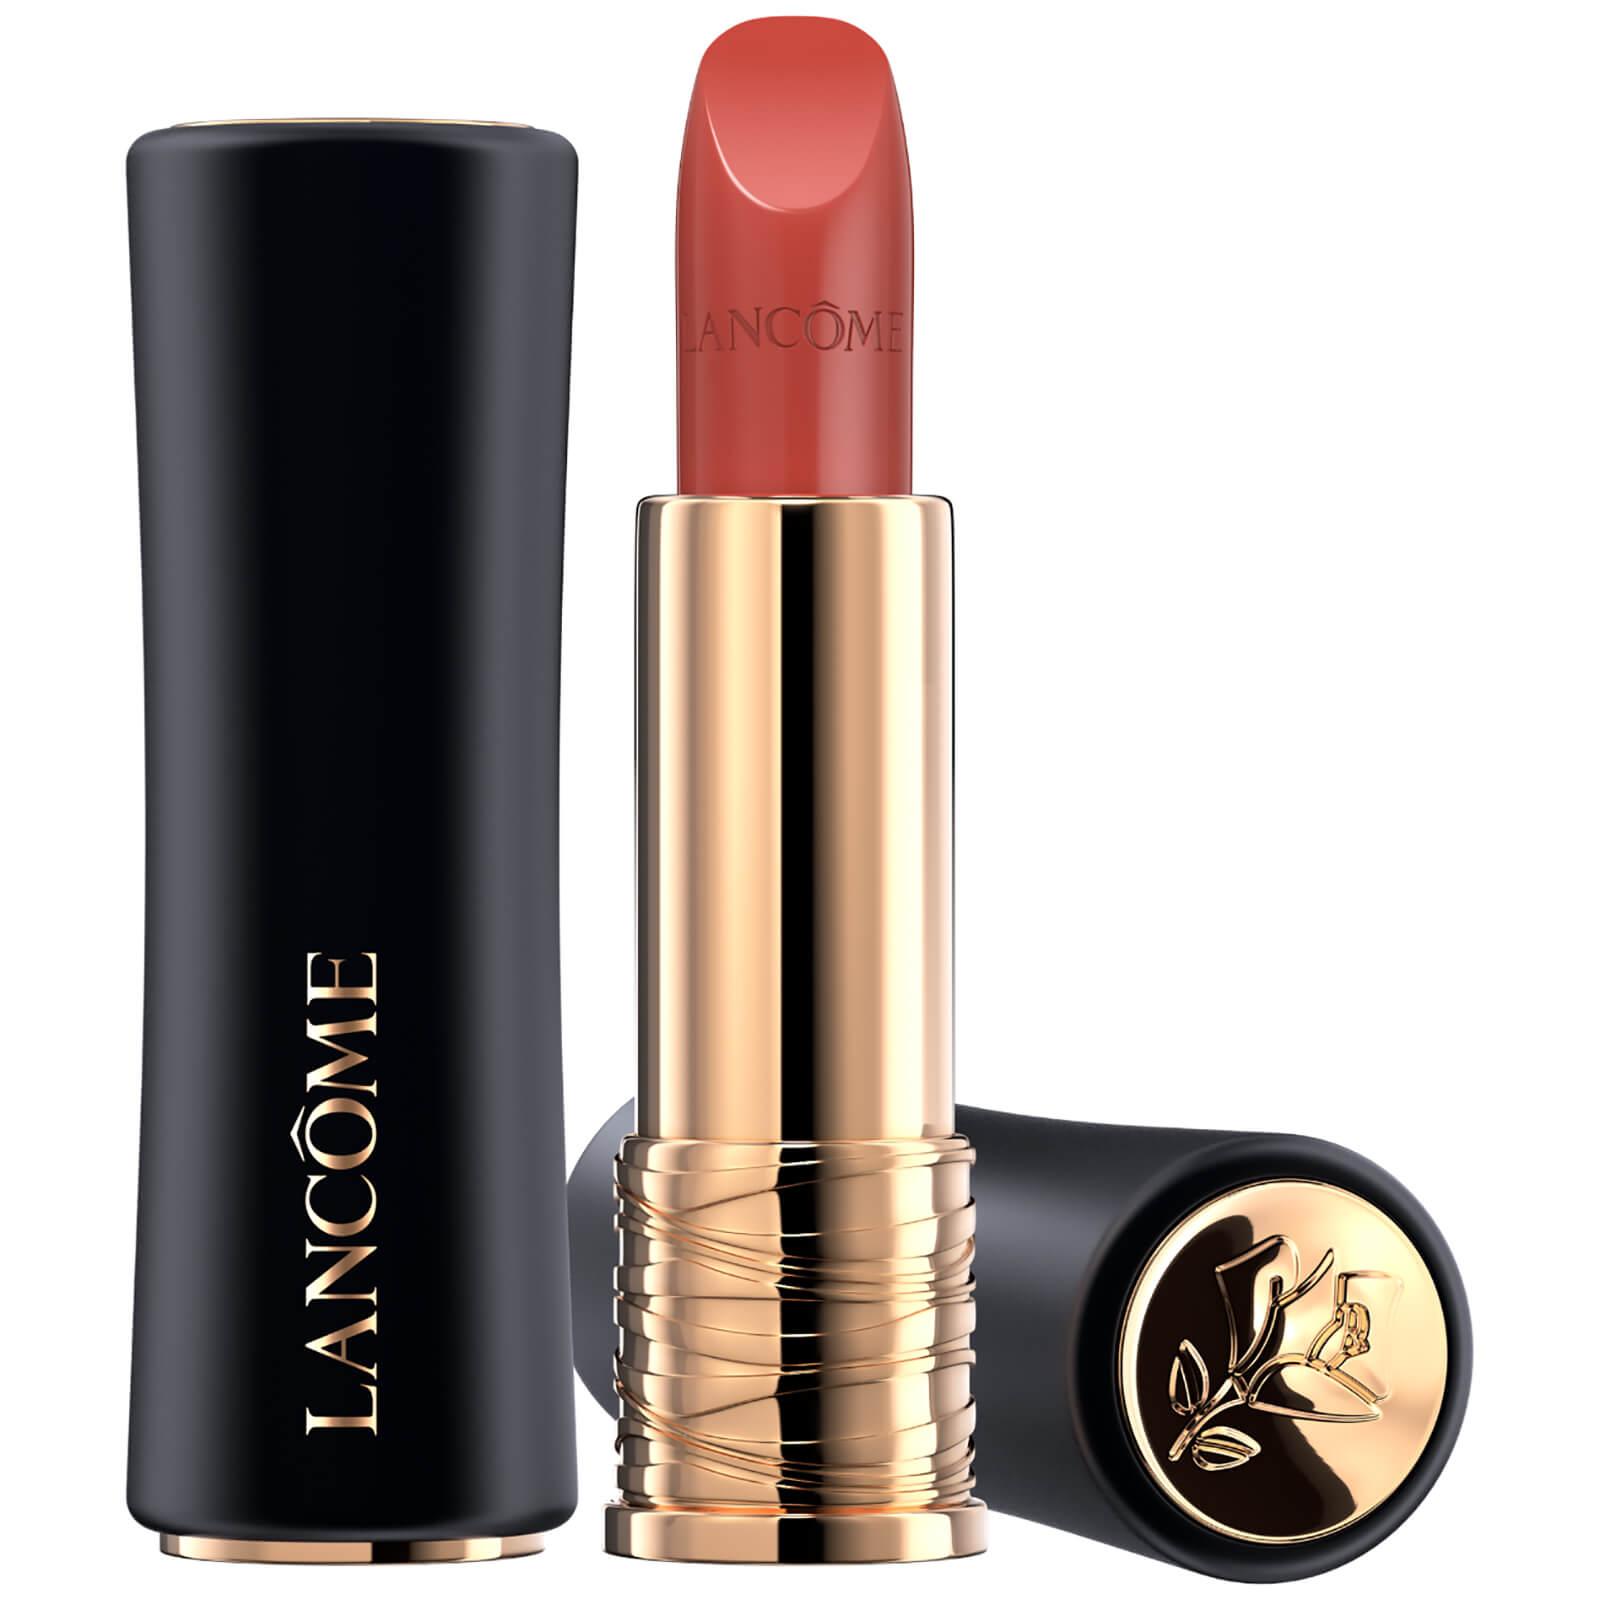 Lancome L'Absolu Rouge Cream Lipstick 35ml (Various Shades) - 11 Rose Nature